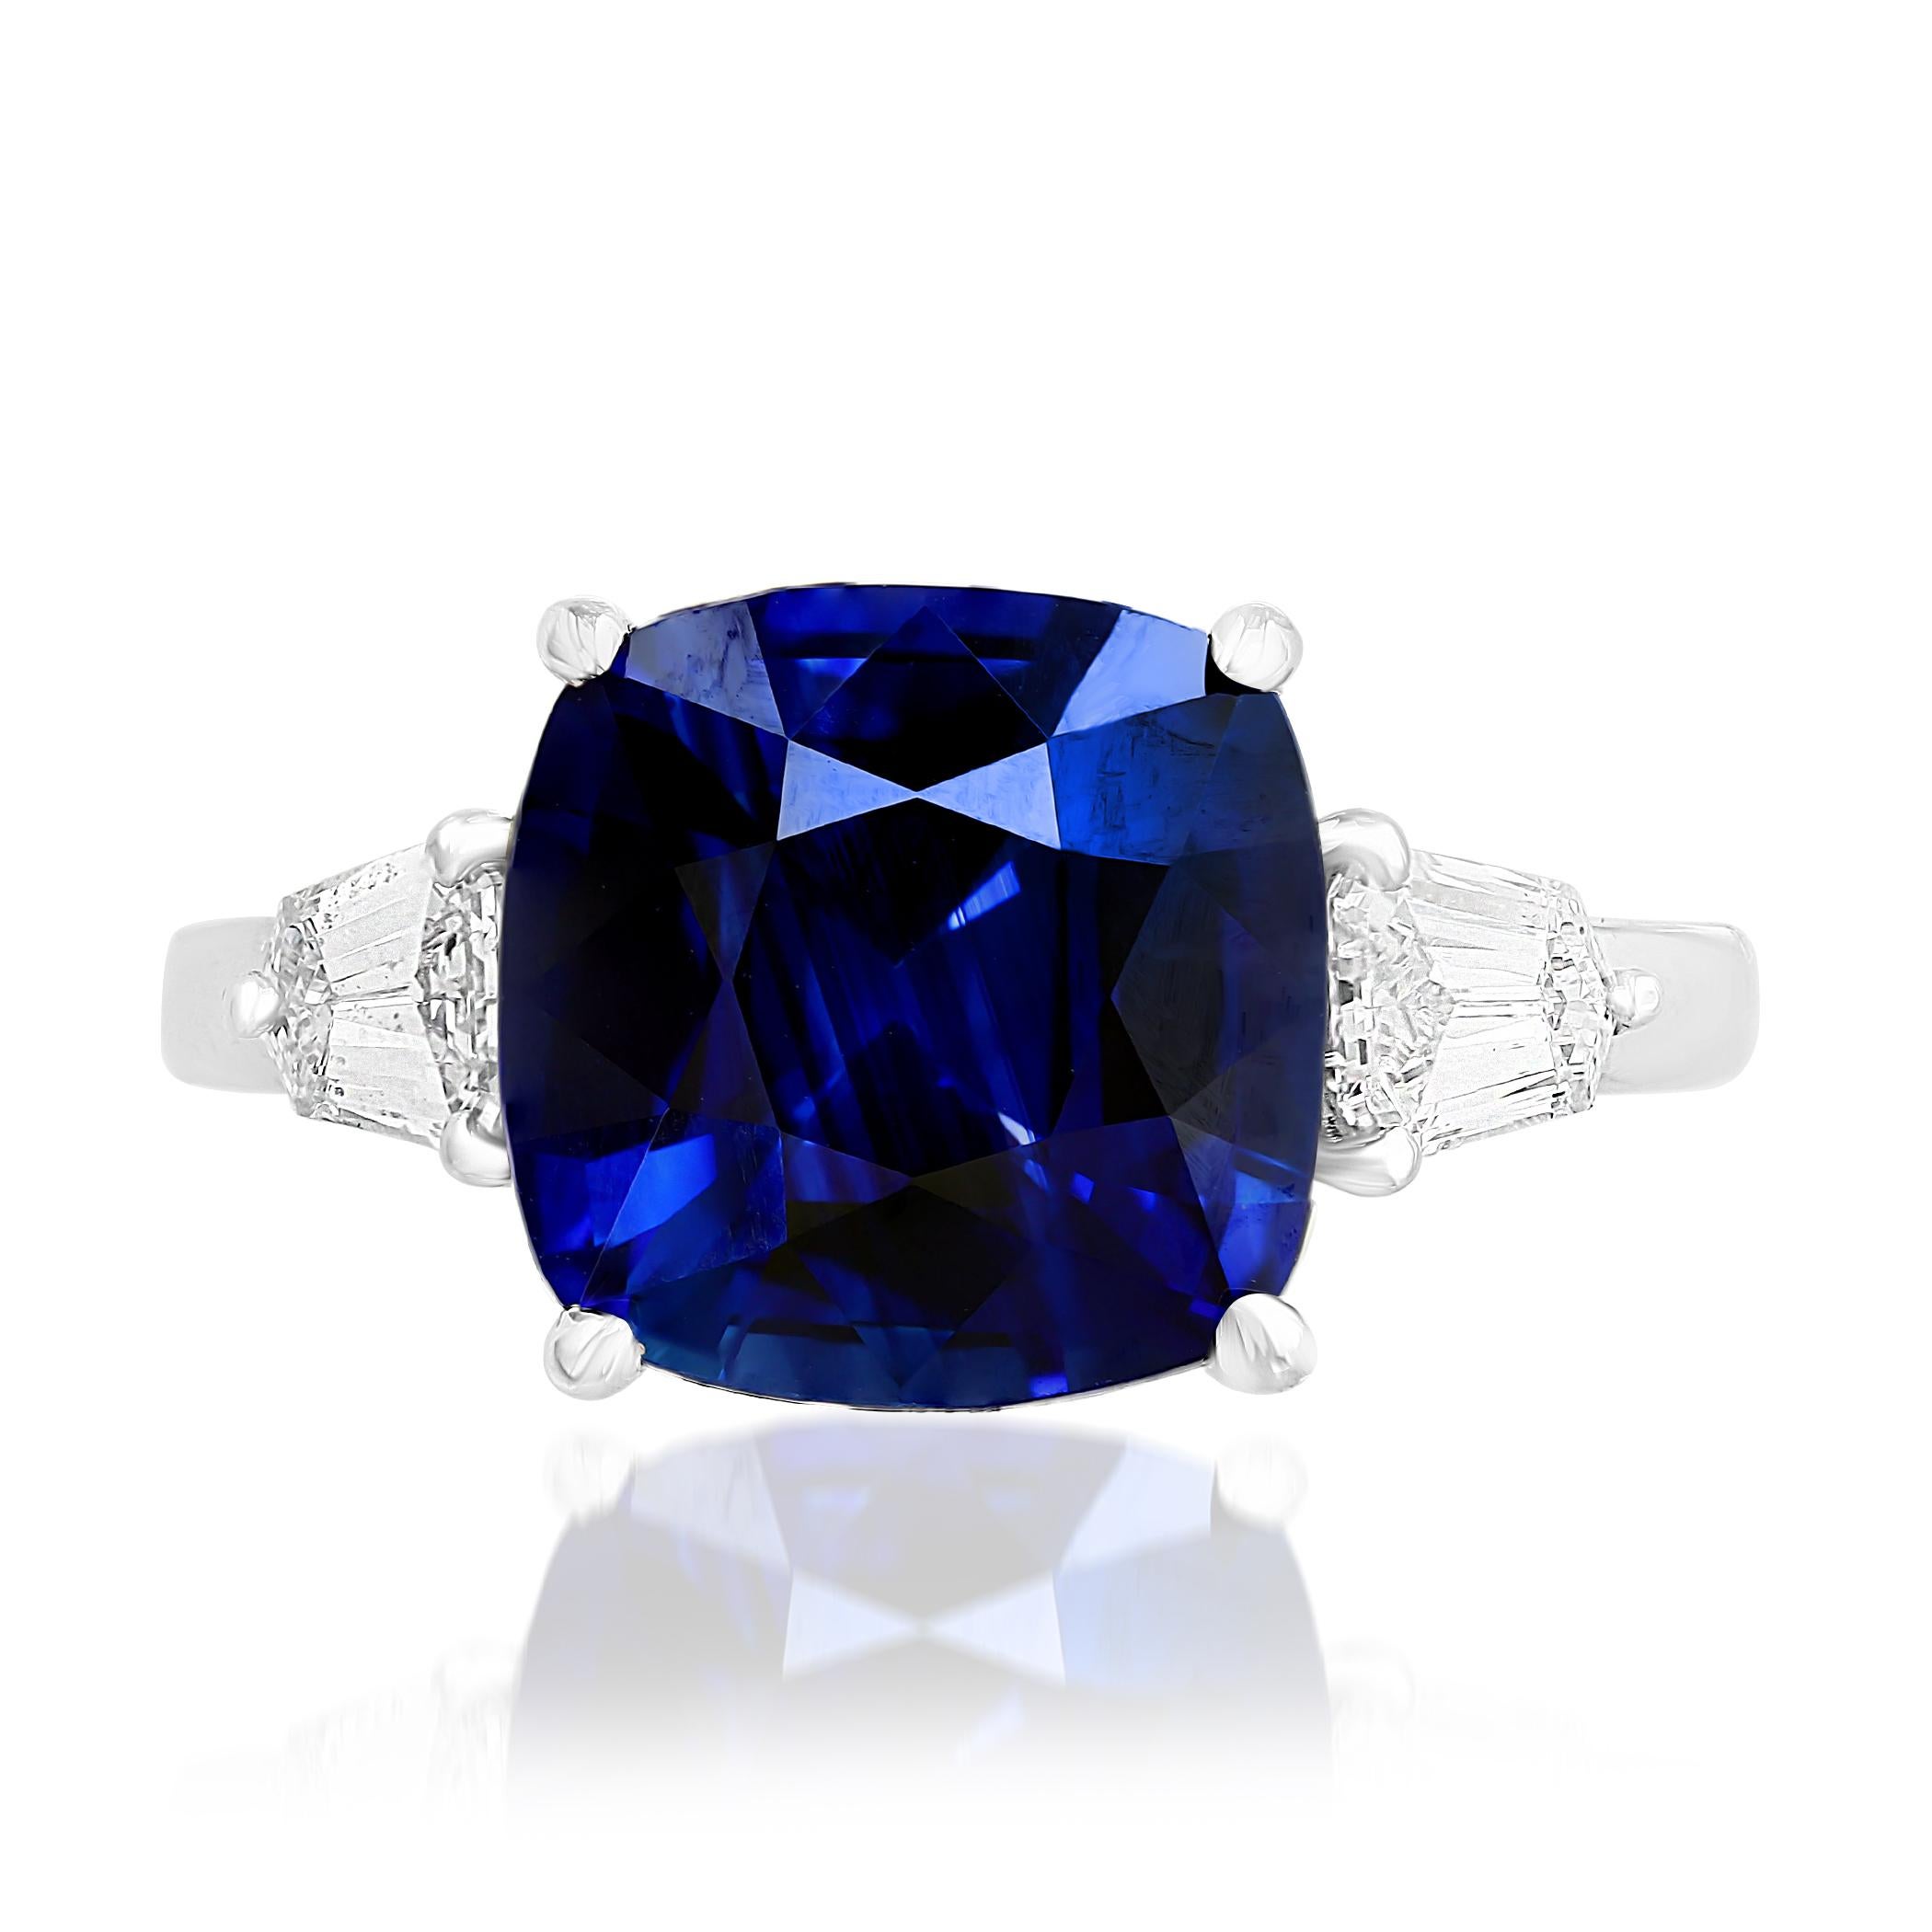 Features a gorgeous 4.22 carat cushion cut blue sapphire. Flanked by a bullet cut diamond side stone and each side weighing 0.54 carats total. Set in platinum.

Style available in different price ranges. Prices are based on your selection. Please